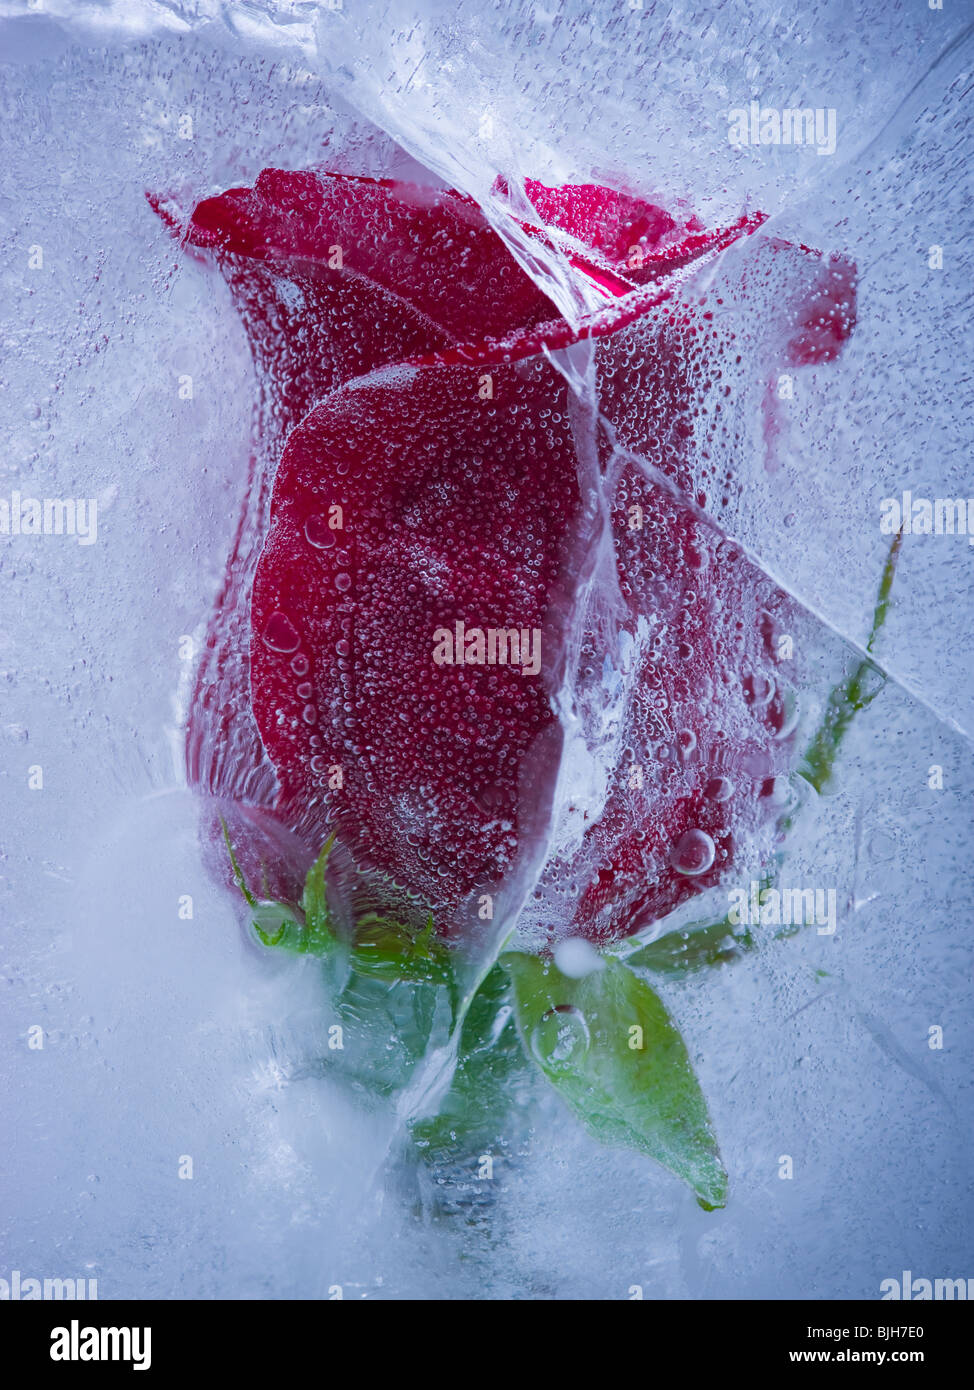 Red Rose Frozen In A Block Of Ice Stock Photo Alamy